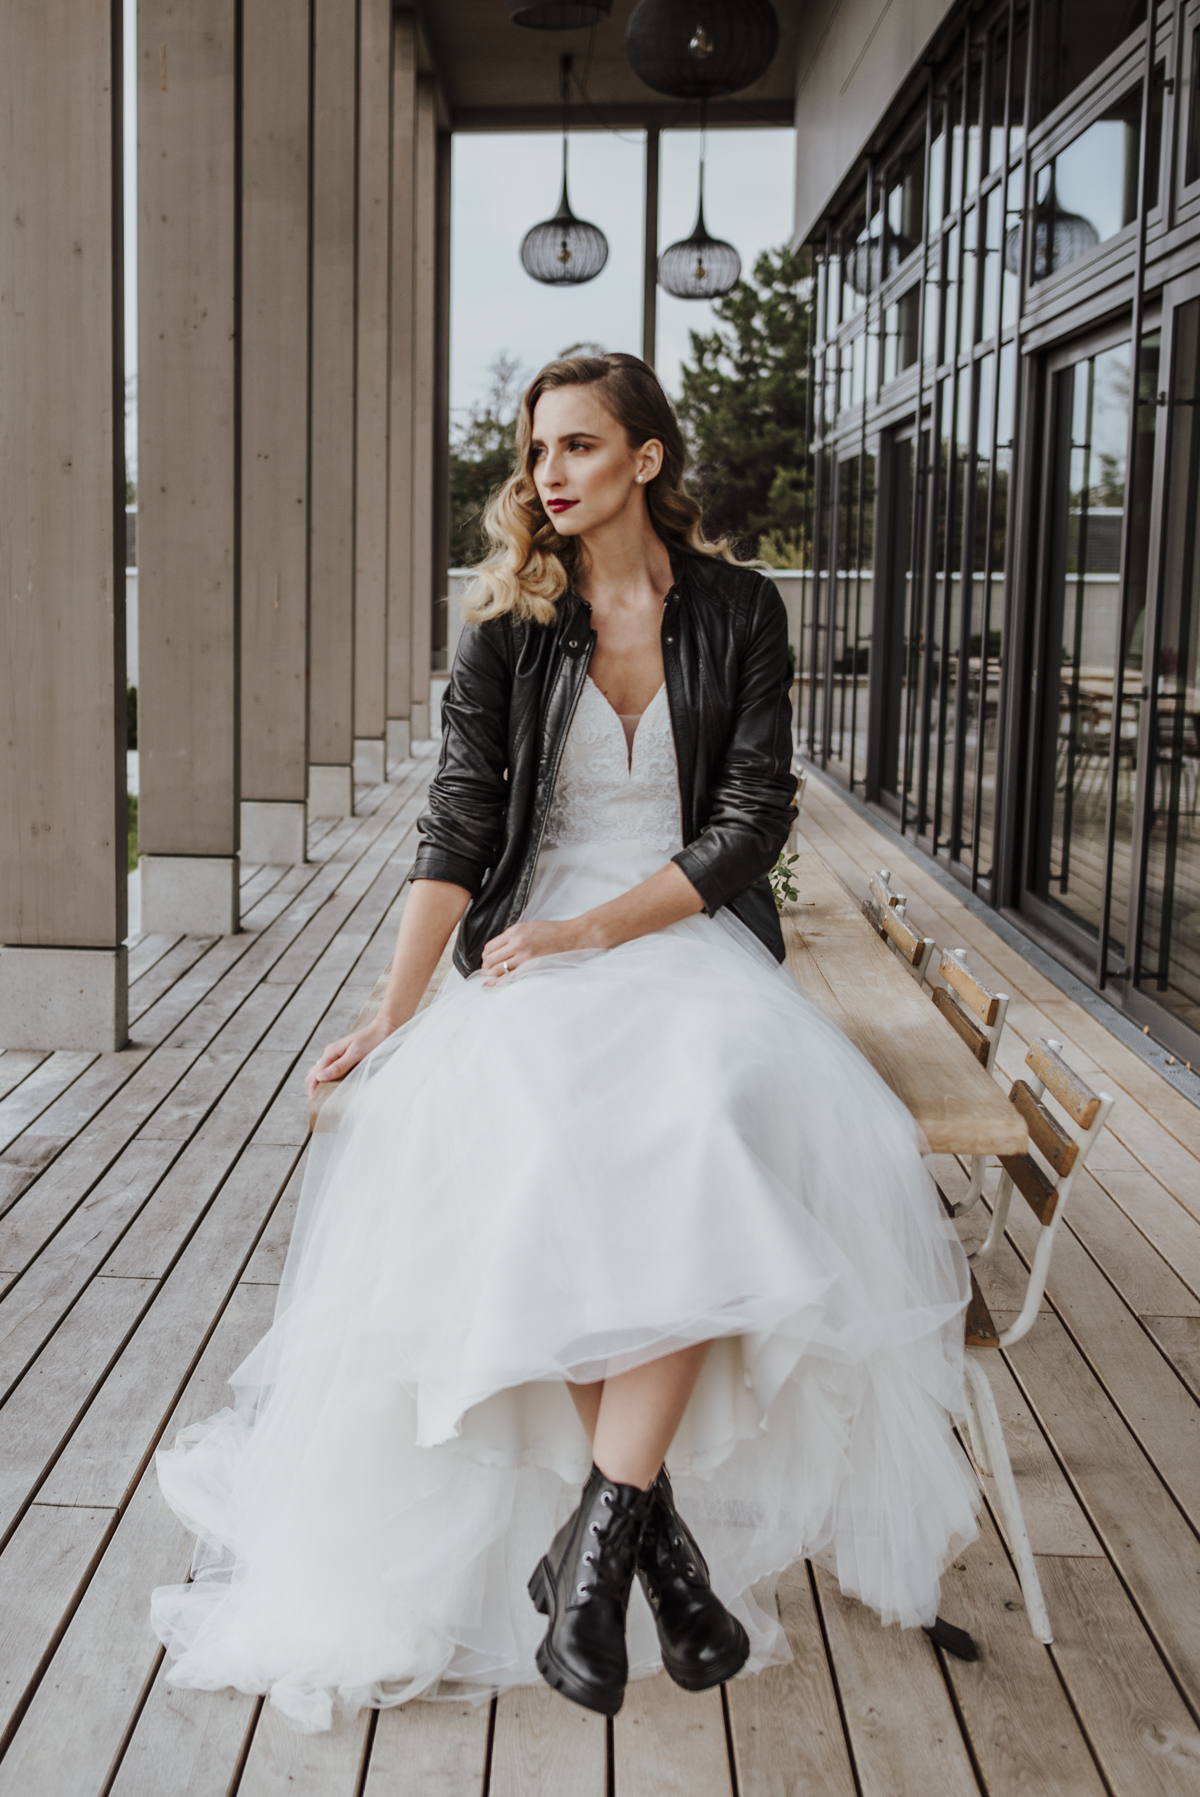 The Edgy Bride Styled Shooting 8